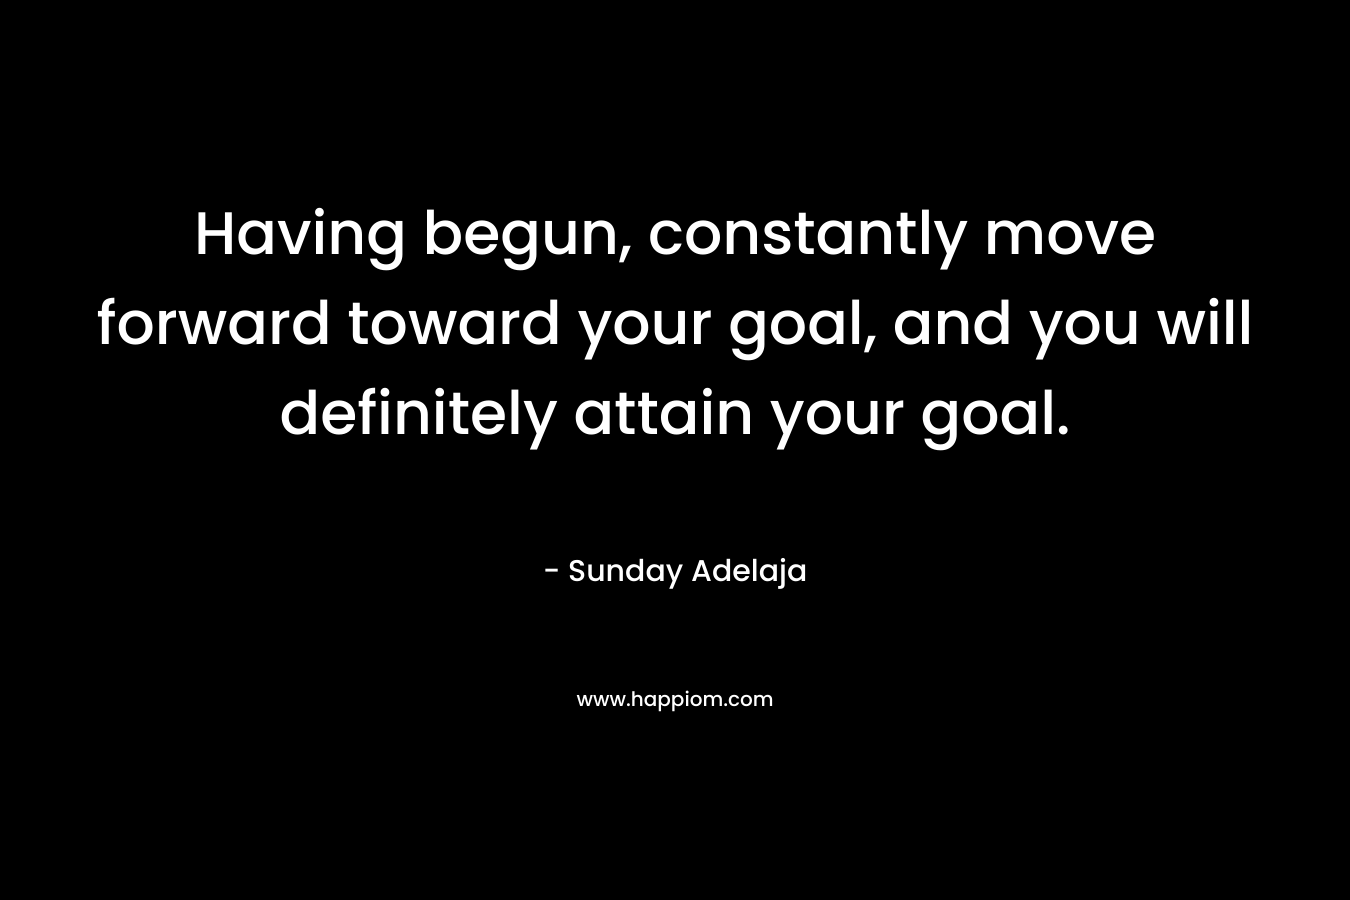 Having begun, constantly move forward toward your goal, and you will definitely attain your goal. – Sunday Adelaja